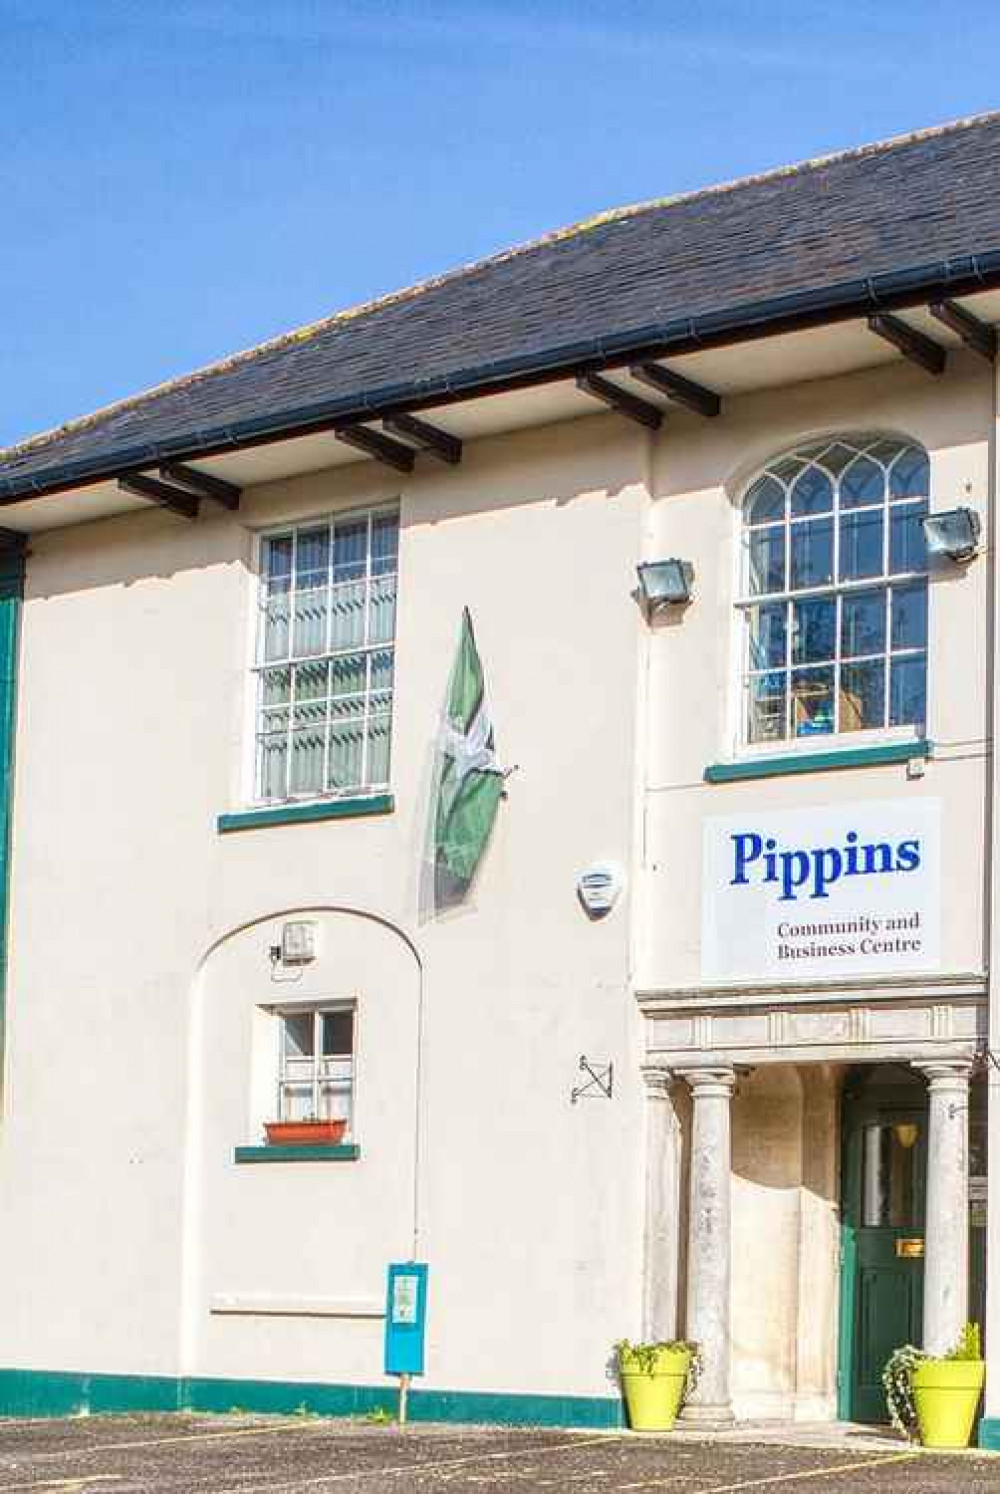 The Pippins Community Centre in Axminster where a crowdfunding appeal has raised £7,000 for the building to be redecorated